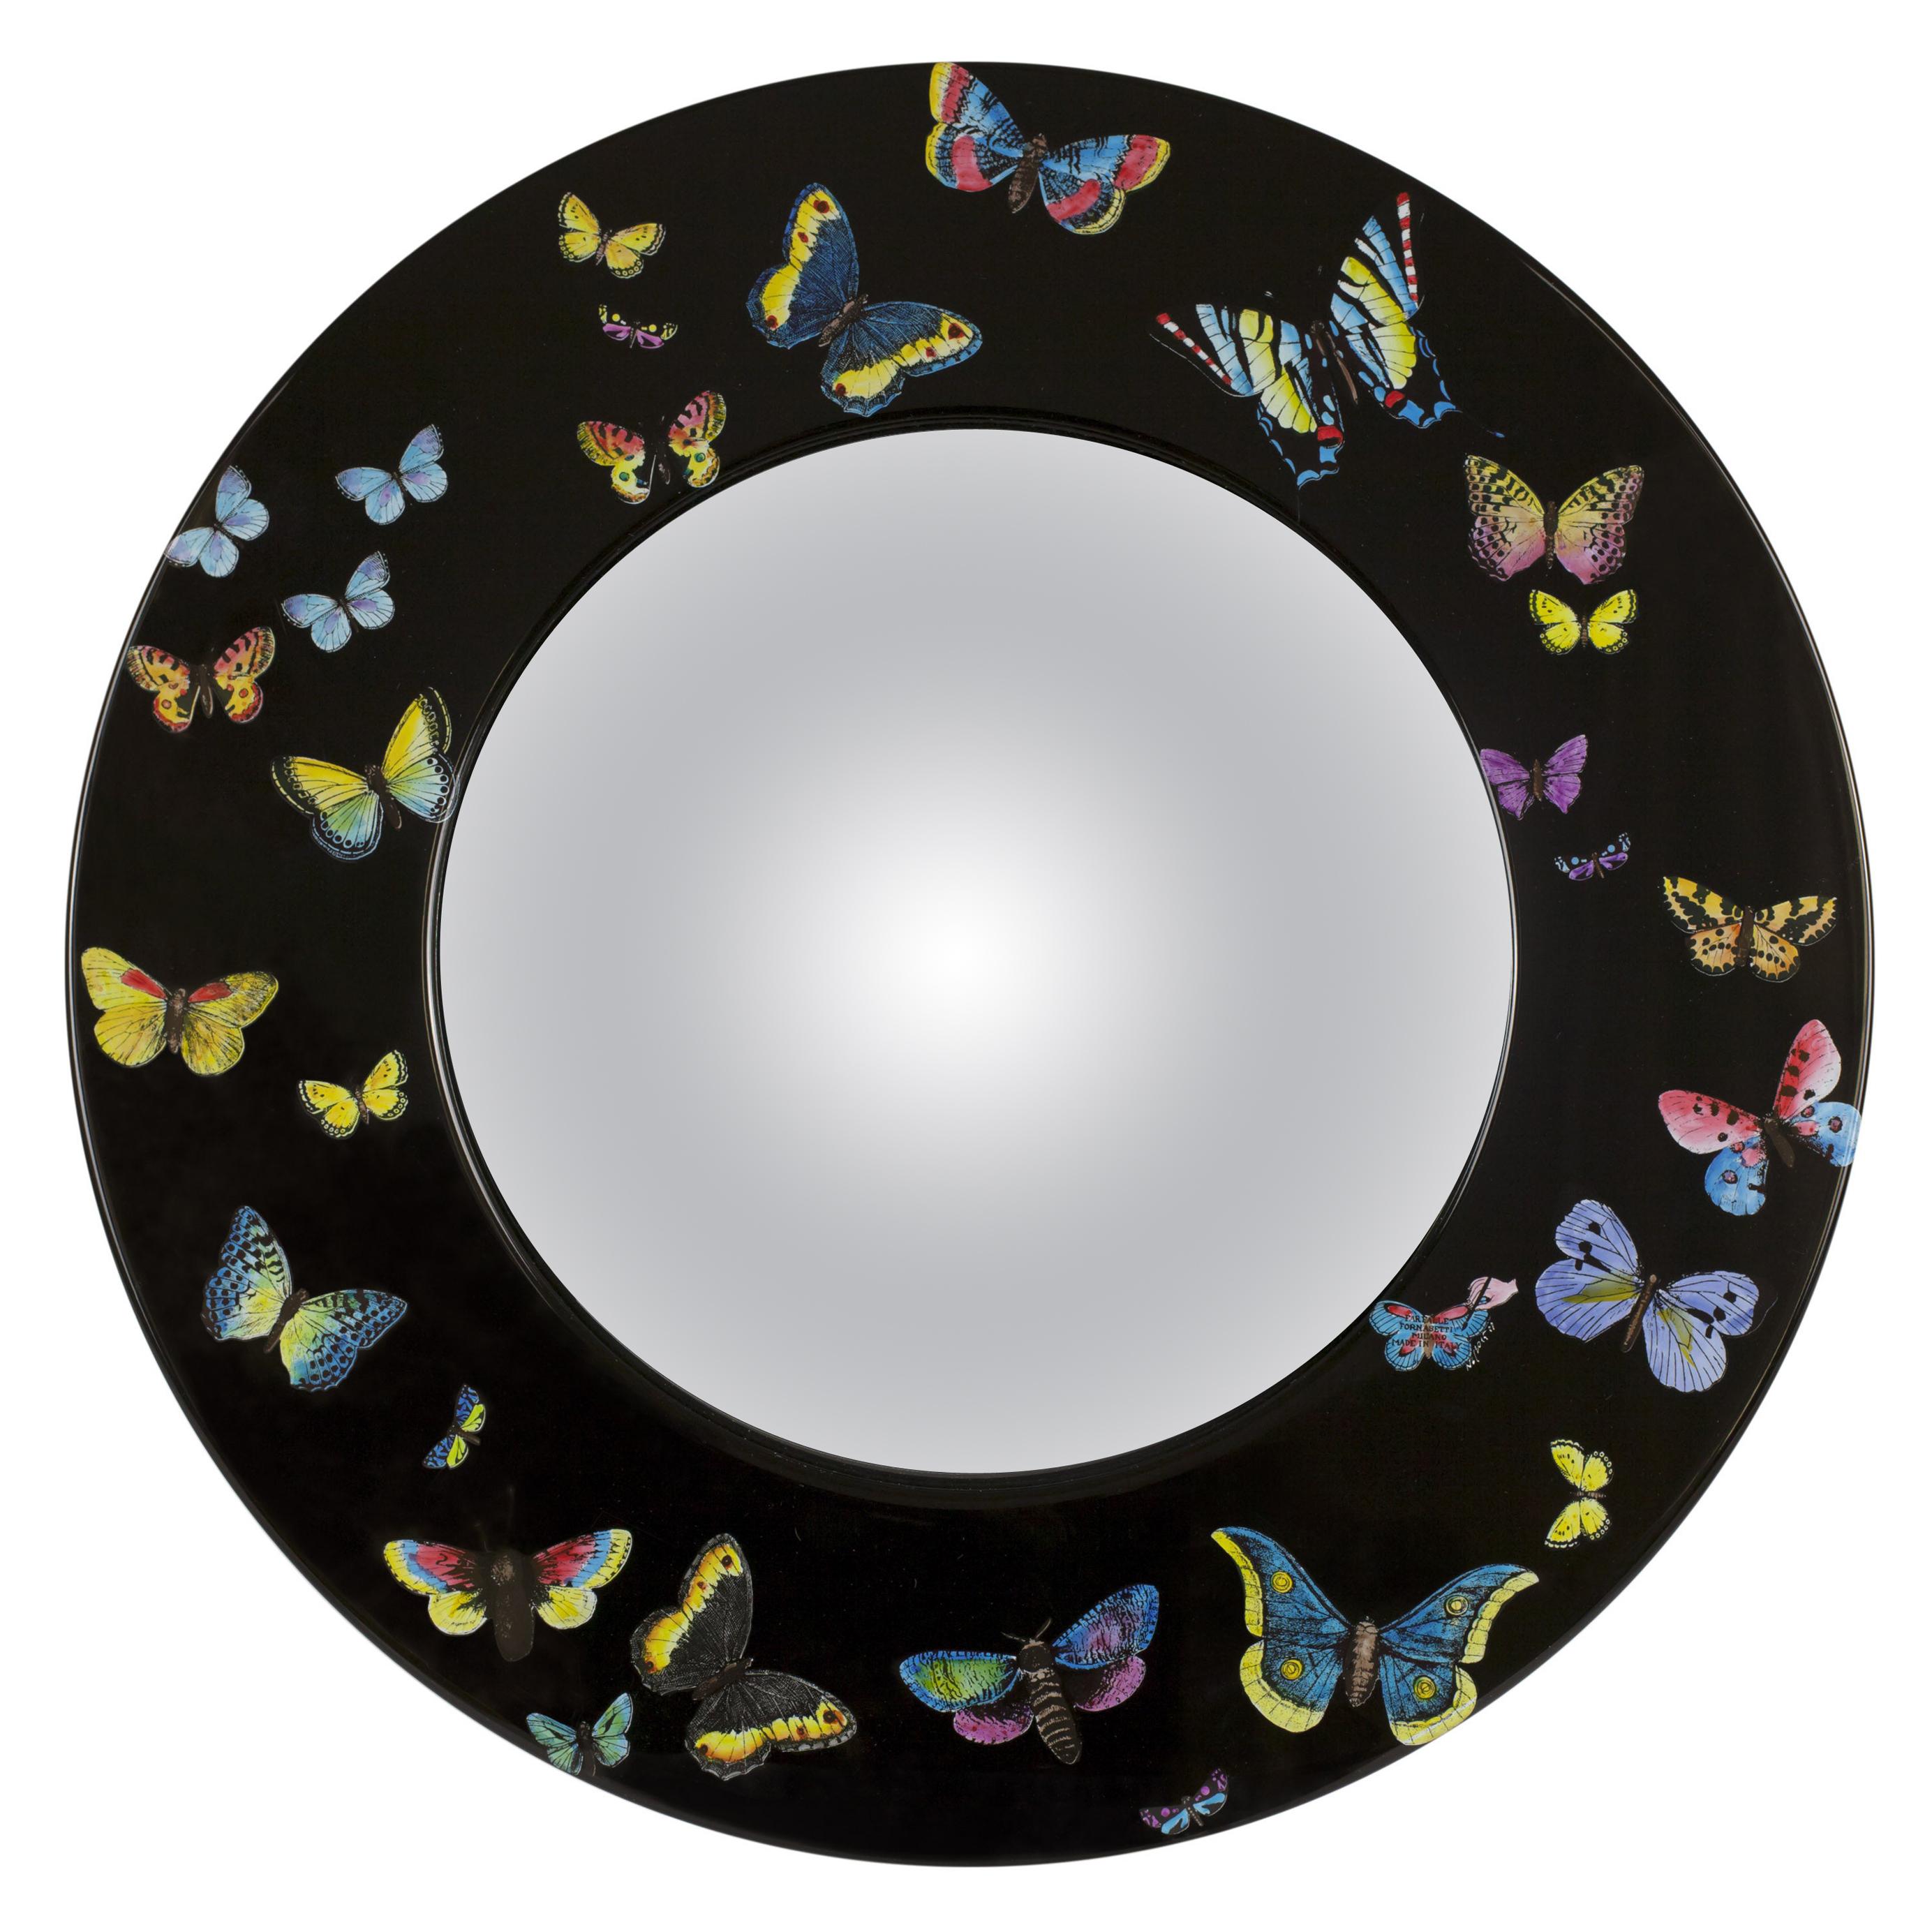 Fornasetti Frame with Convex Mirror Farfalle Butterflies Color on Black